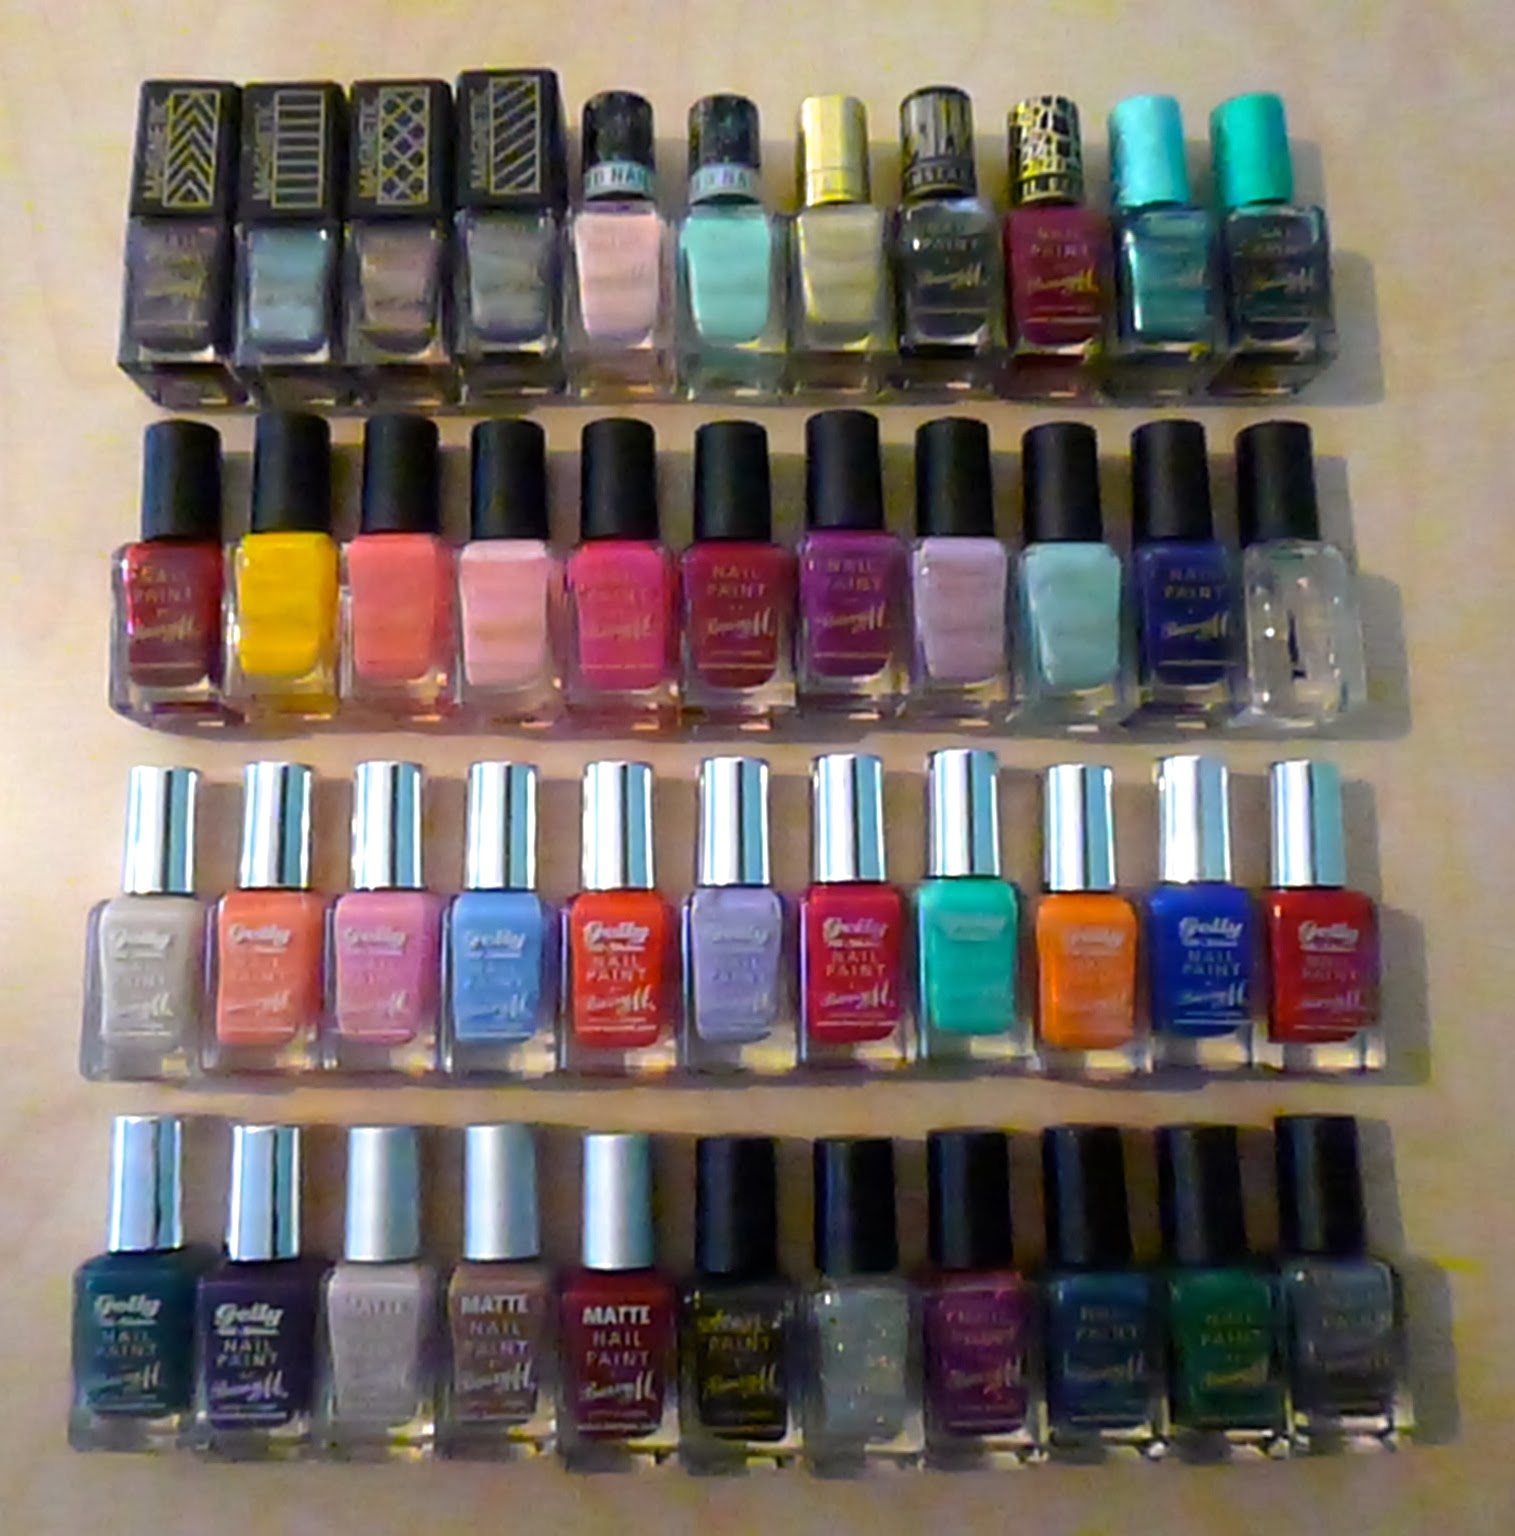 Hanclarky: My Barry M Nail Paint Collection